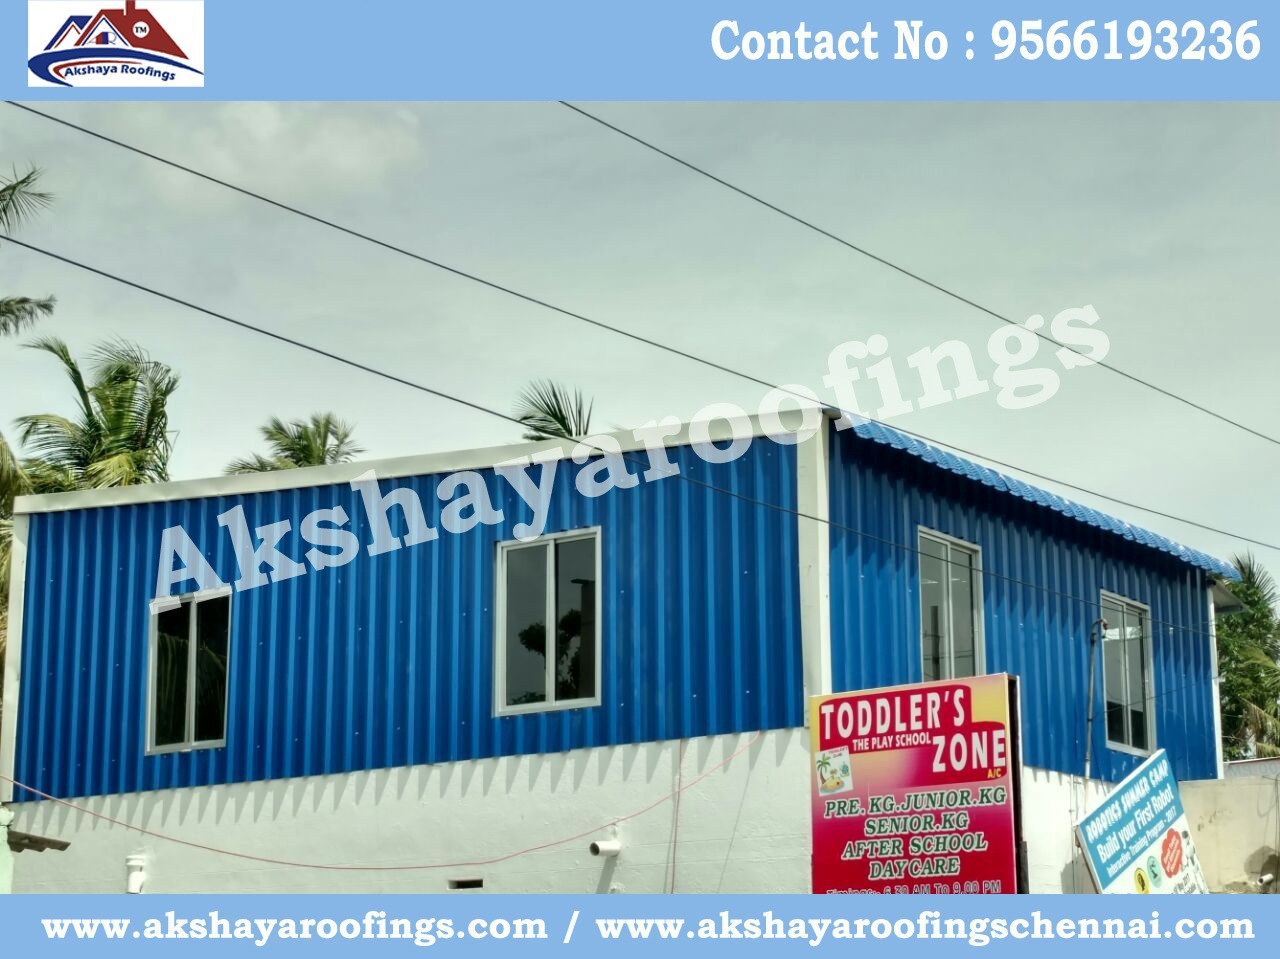 Terrace roofing shed contractors Chennai